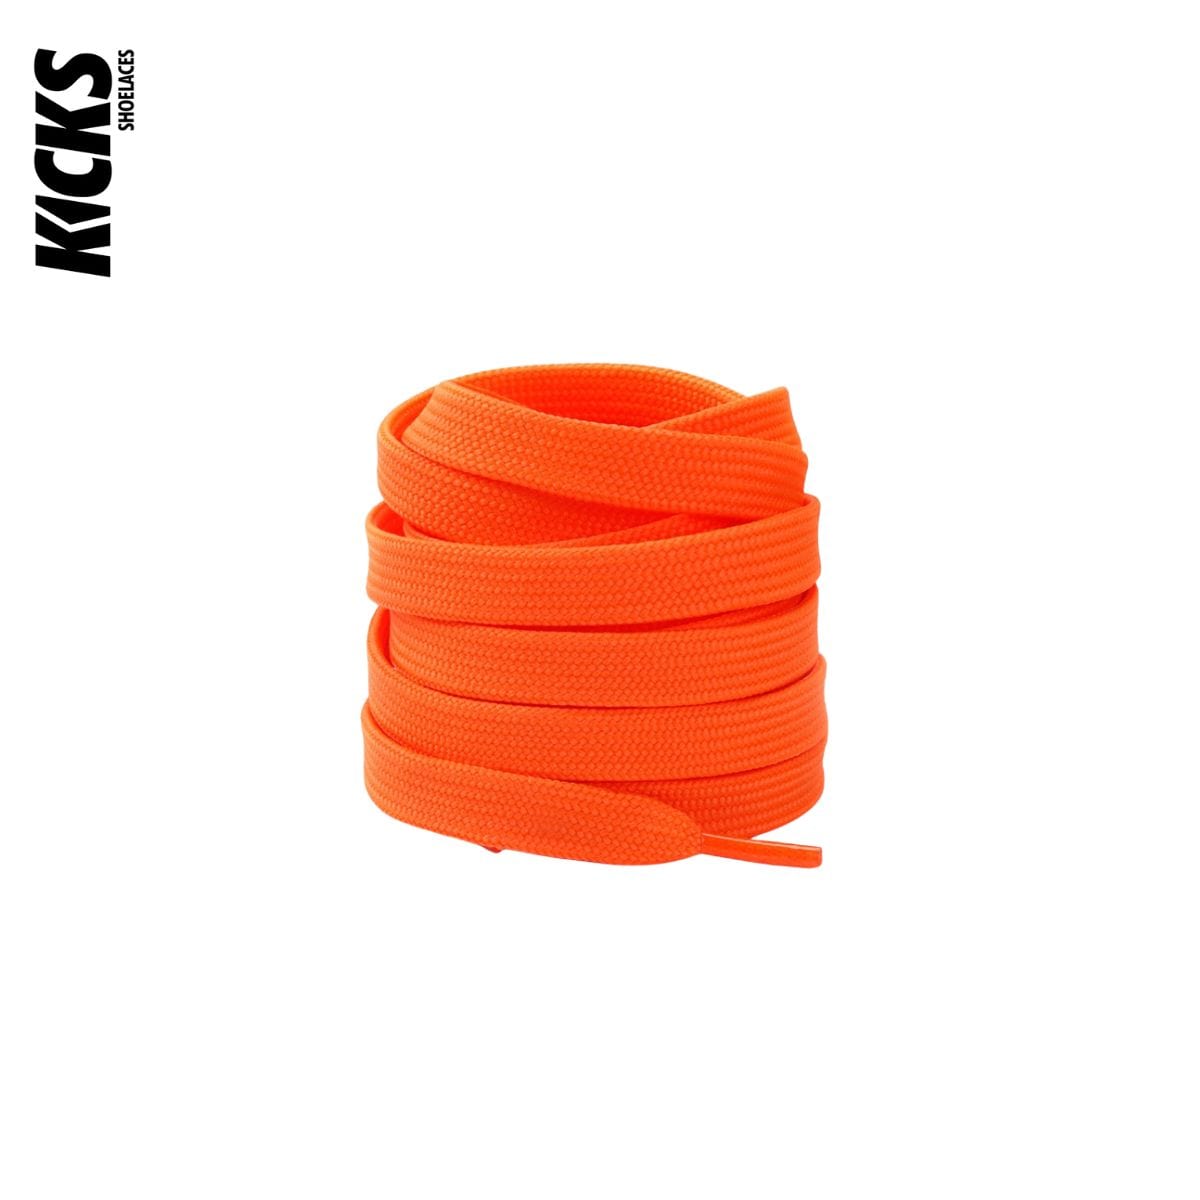 Orange Replacement Shoe Laces for Adidas NMD Sneakers by Kicks Shoelaces